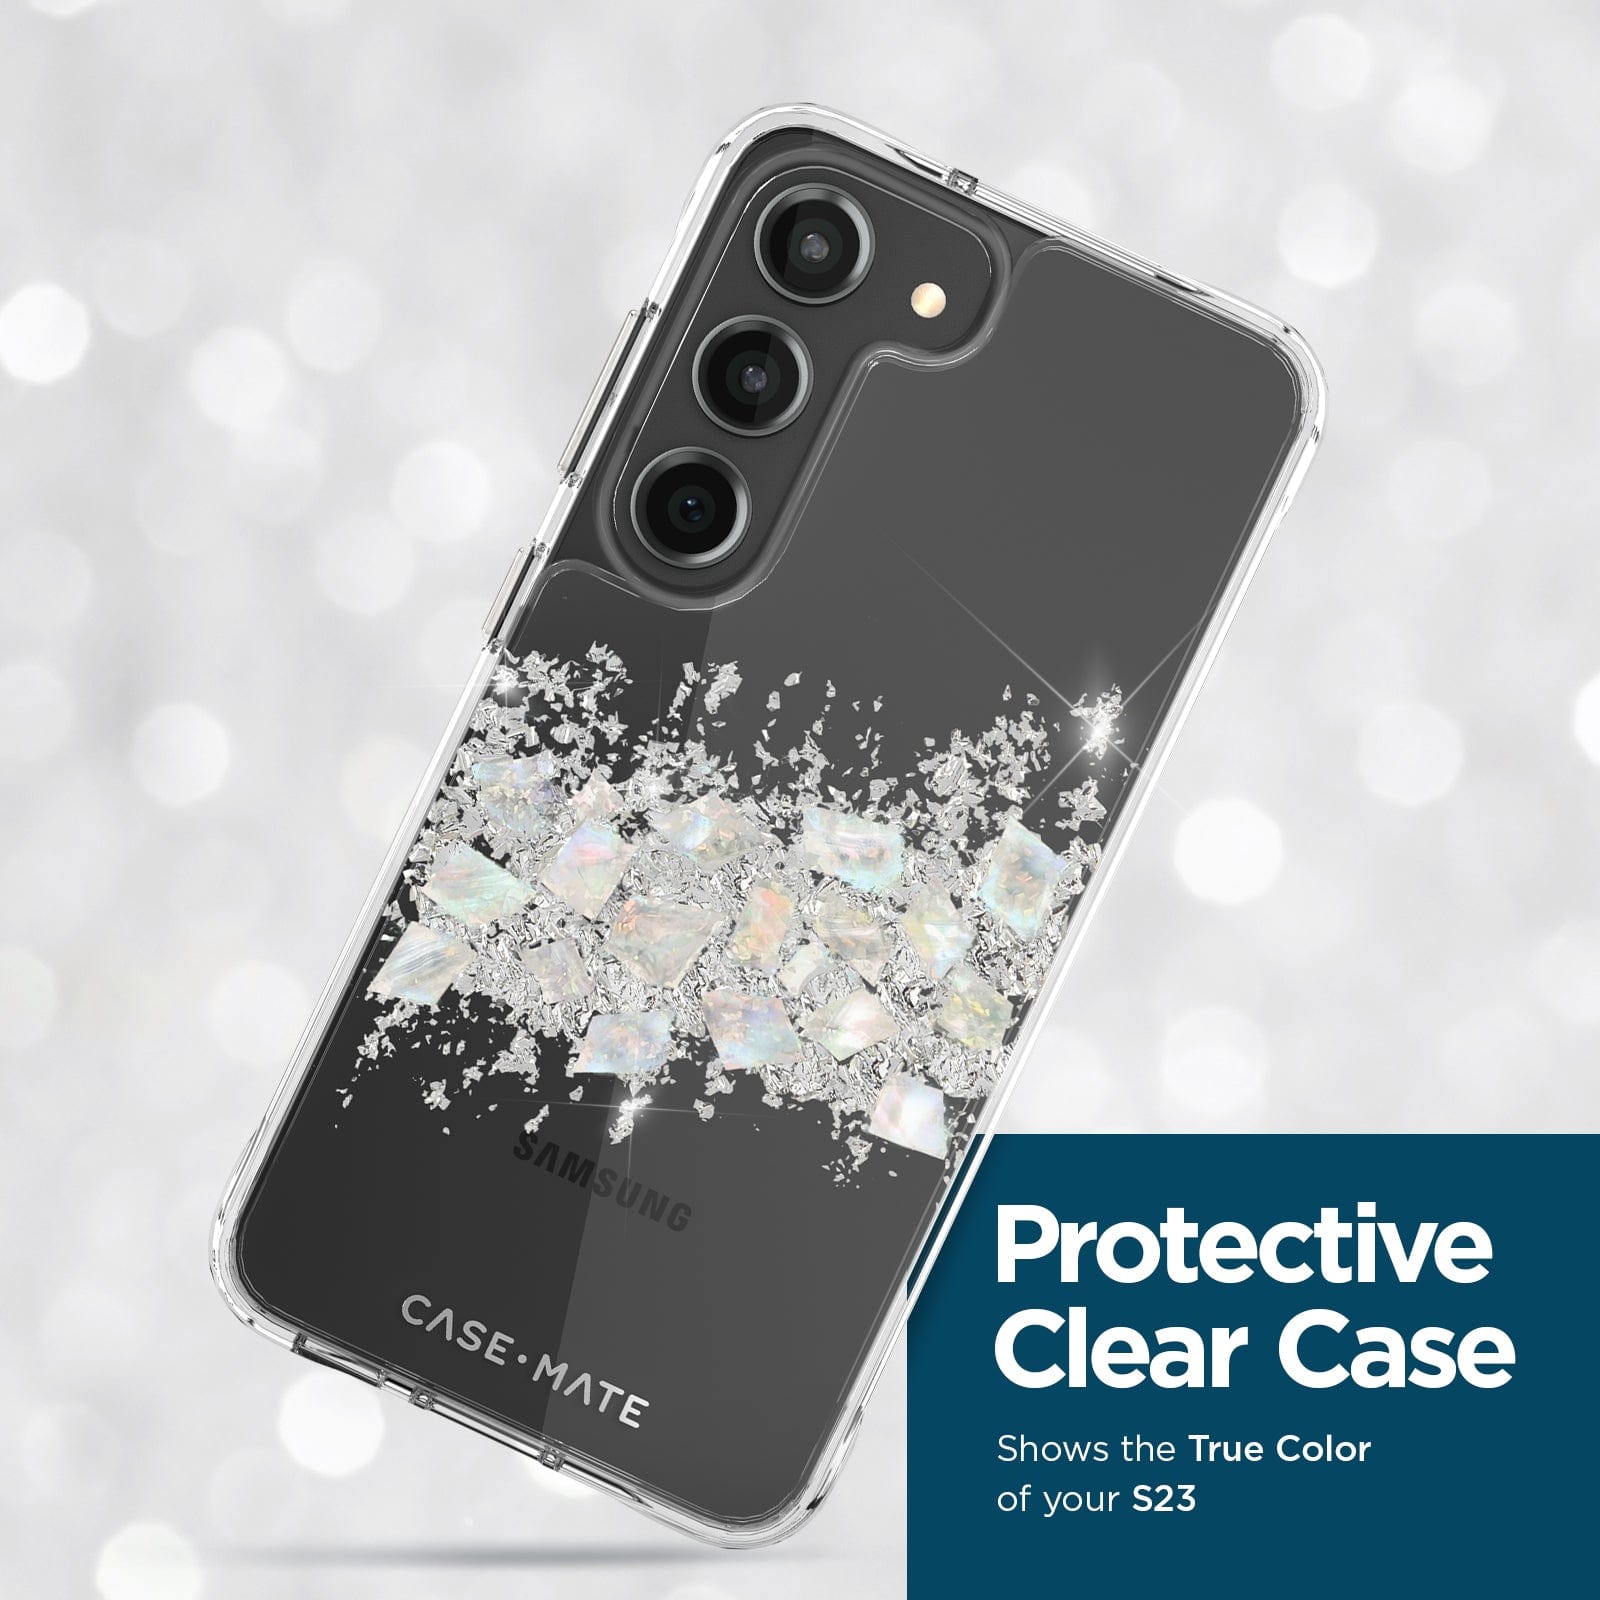 PROTECTIVE CLEAR CASE. SHOWS THE TRUE COLOR OF YOUR S23.